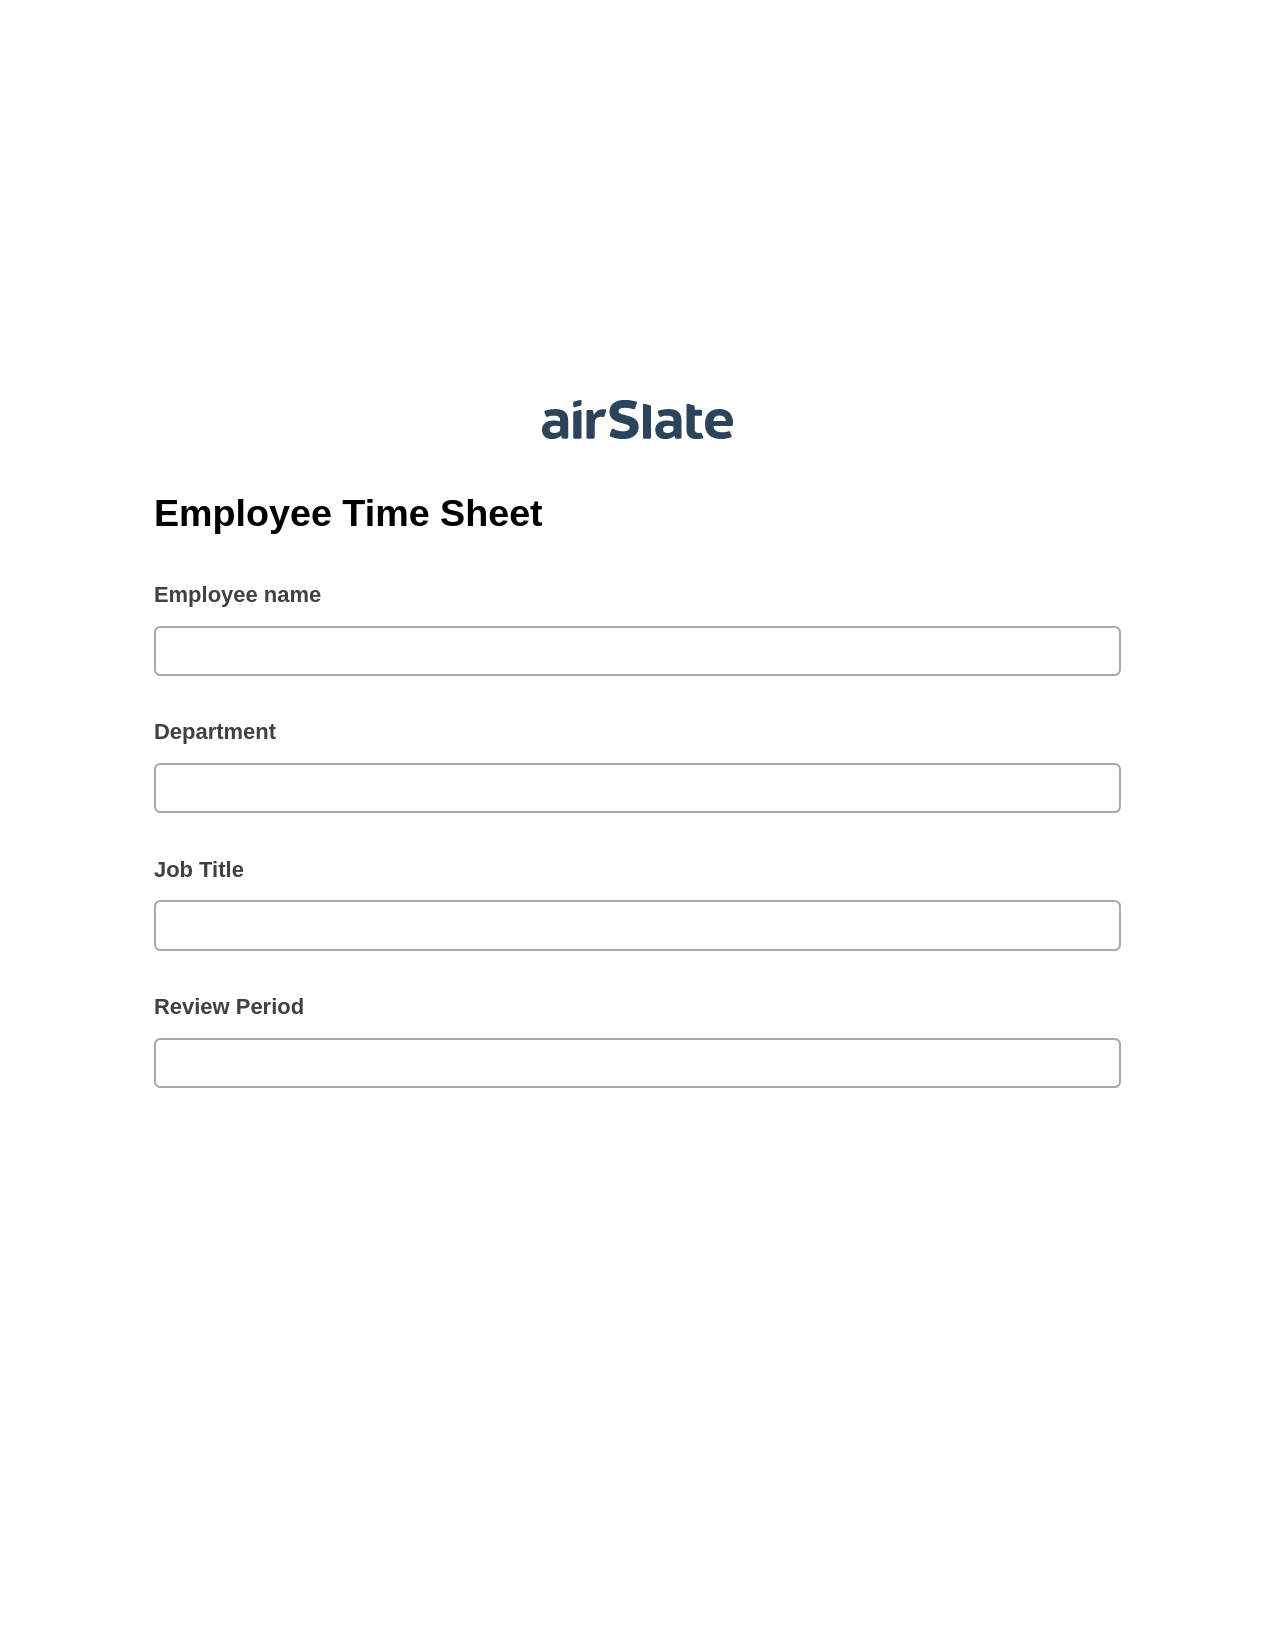 Multirole Employee Time Sheet Pre-fill from Office 365 Excel Bot, Unassign Role Bot, Archive to Dropbox Bot